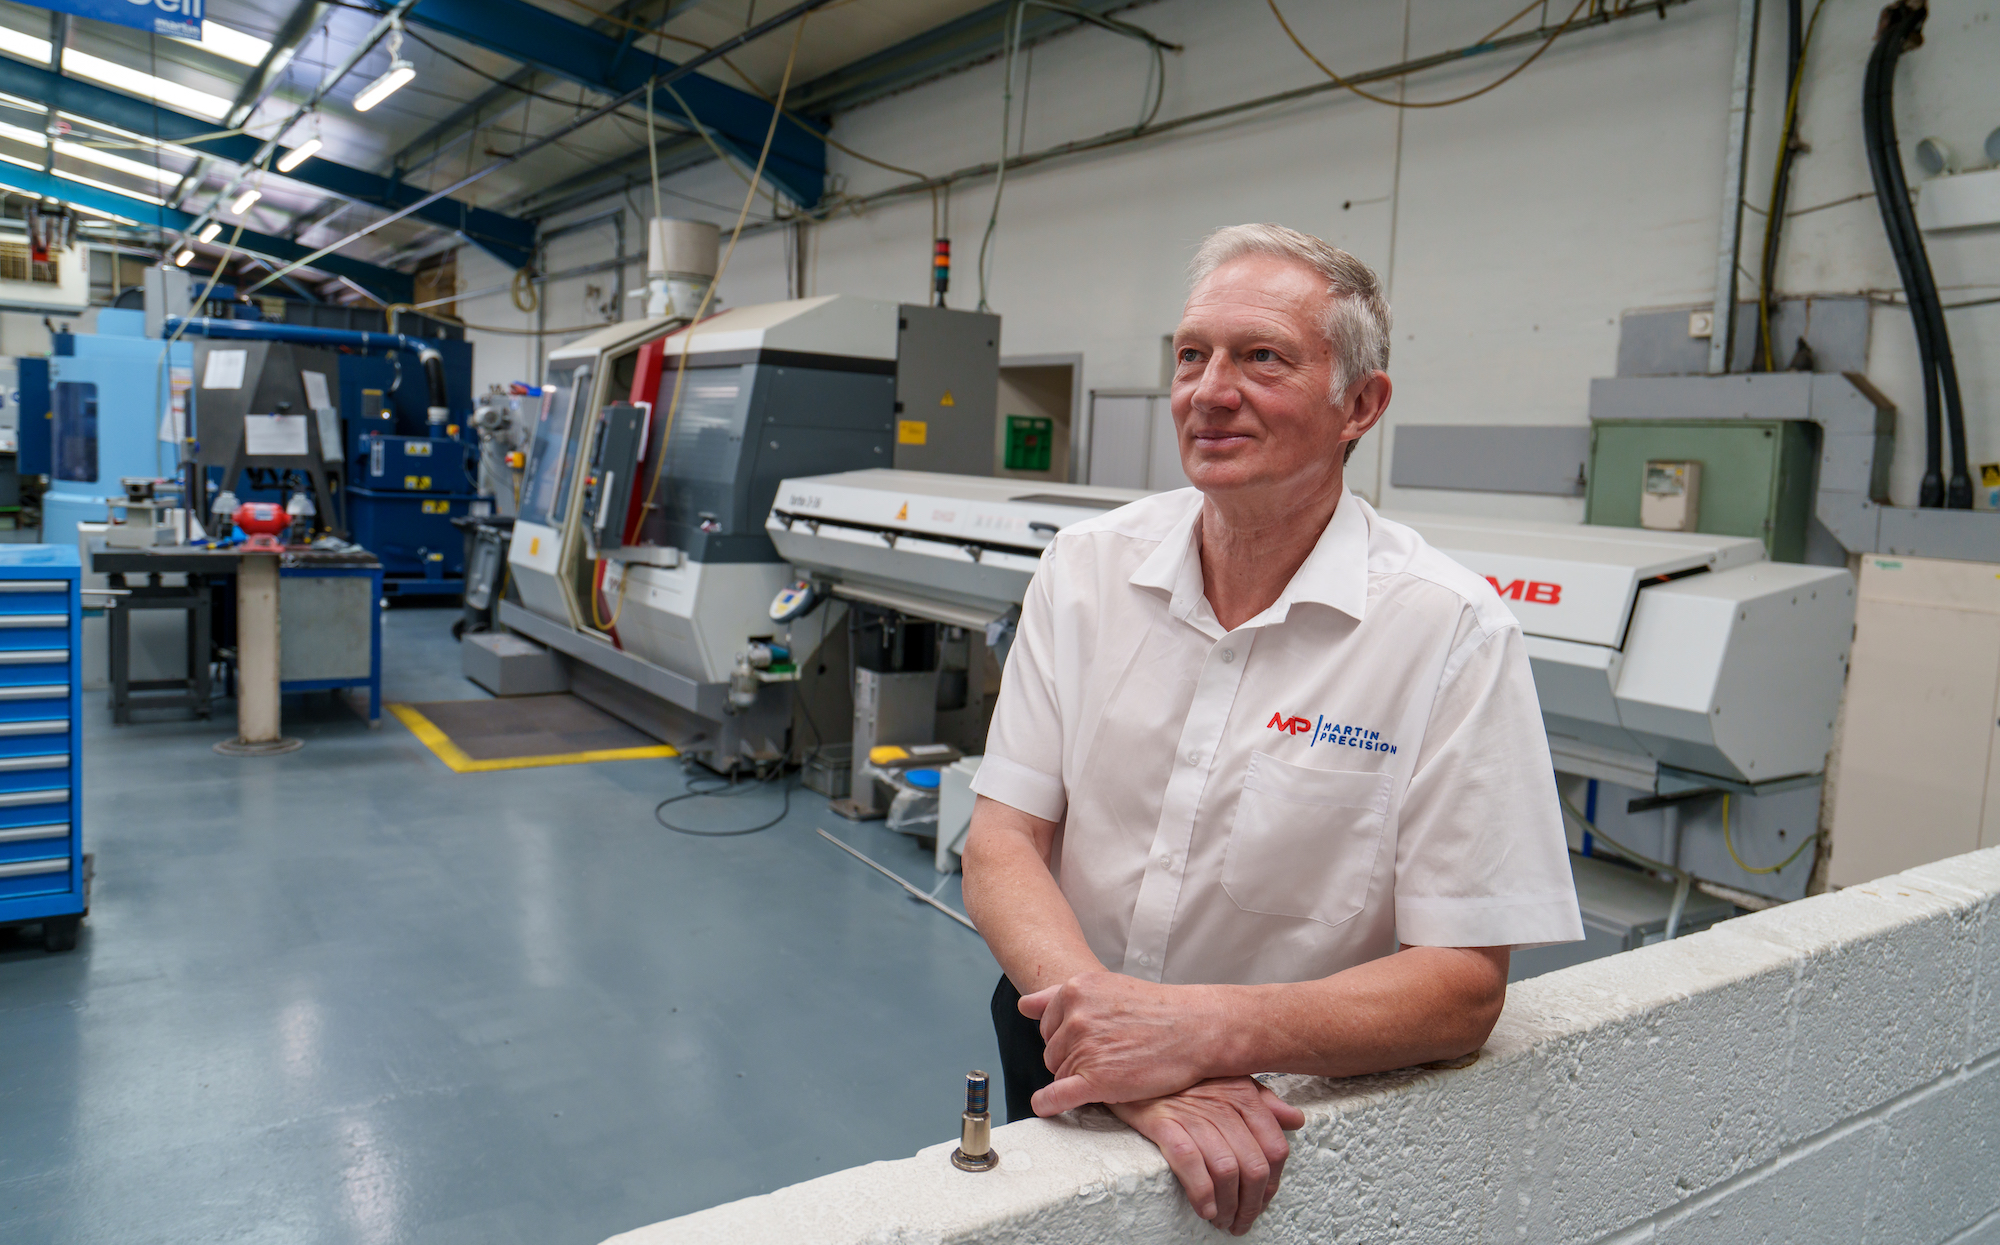 Martin Precision celebrates 30 years with shift to employee ownership